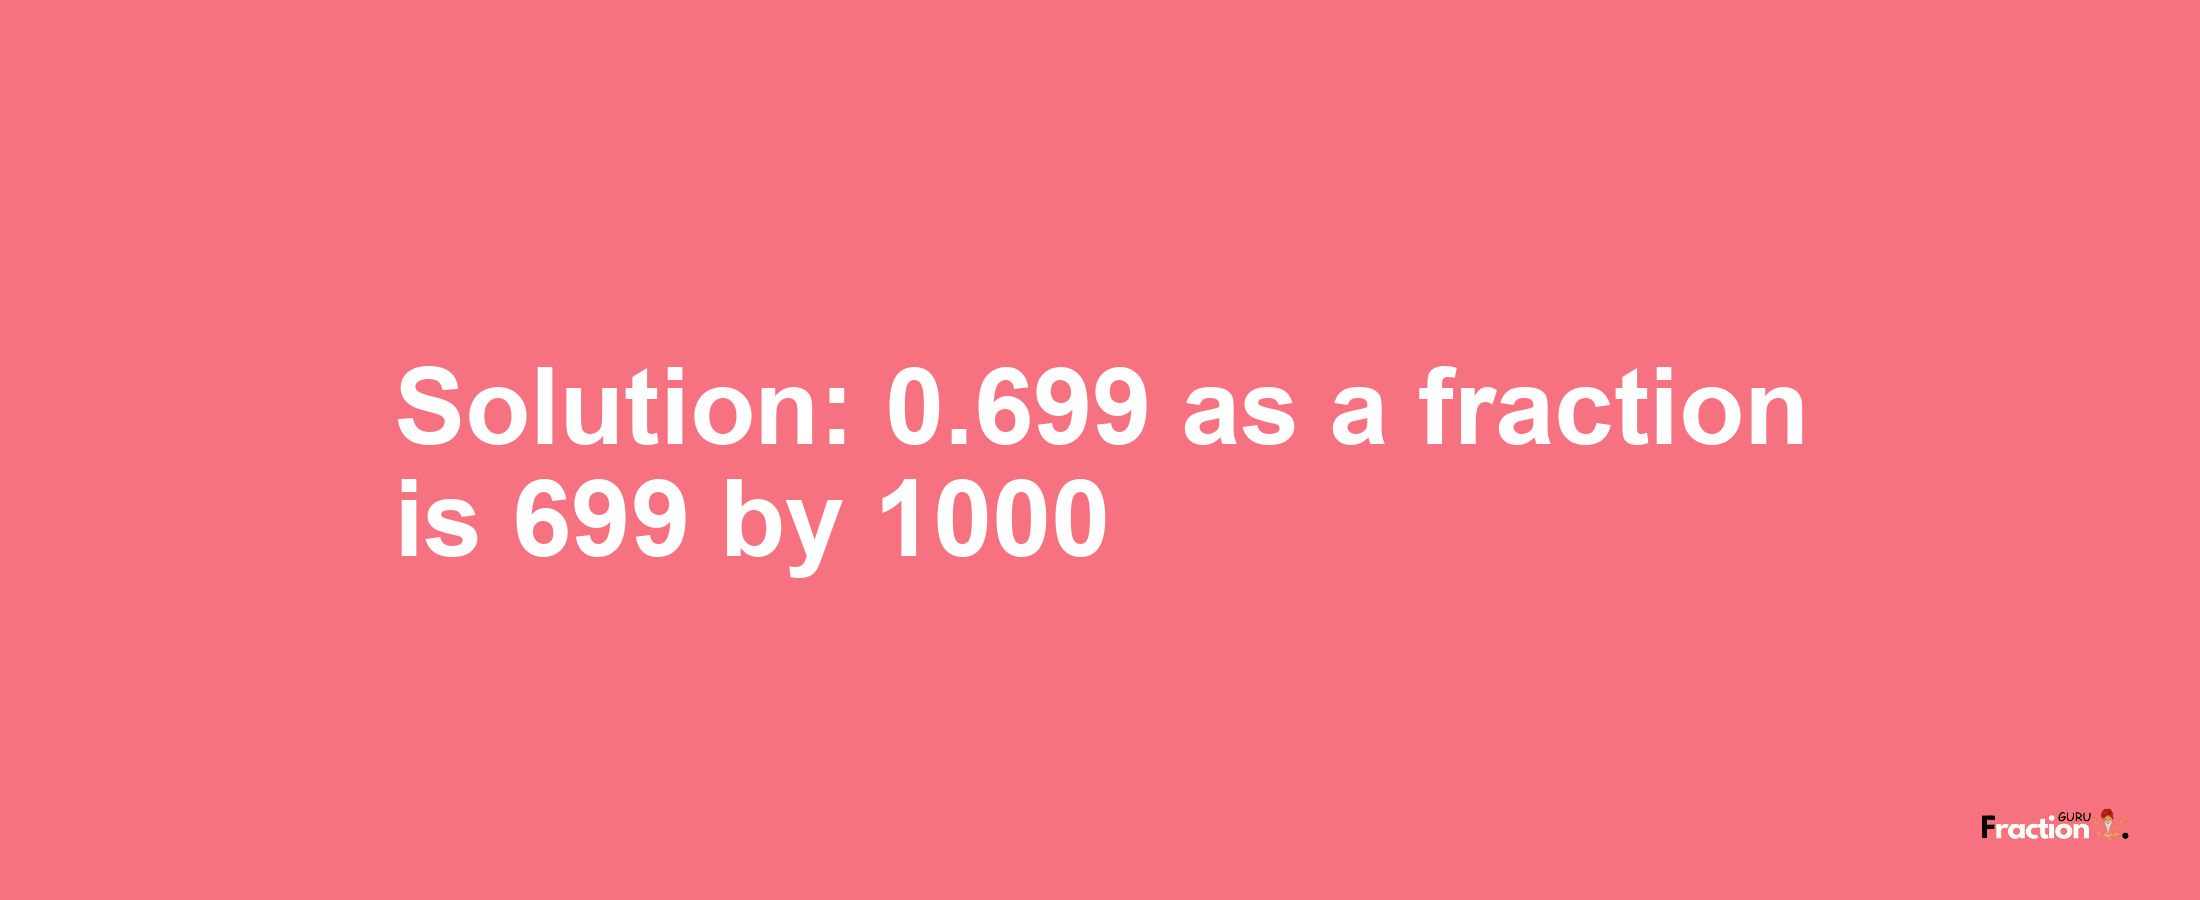 Solution:0.699 as a fraction is 699/1000